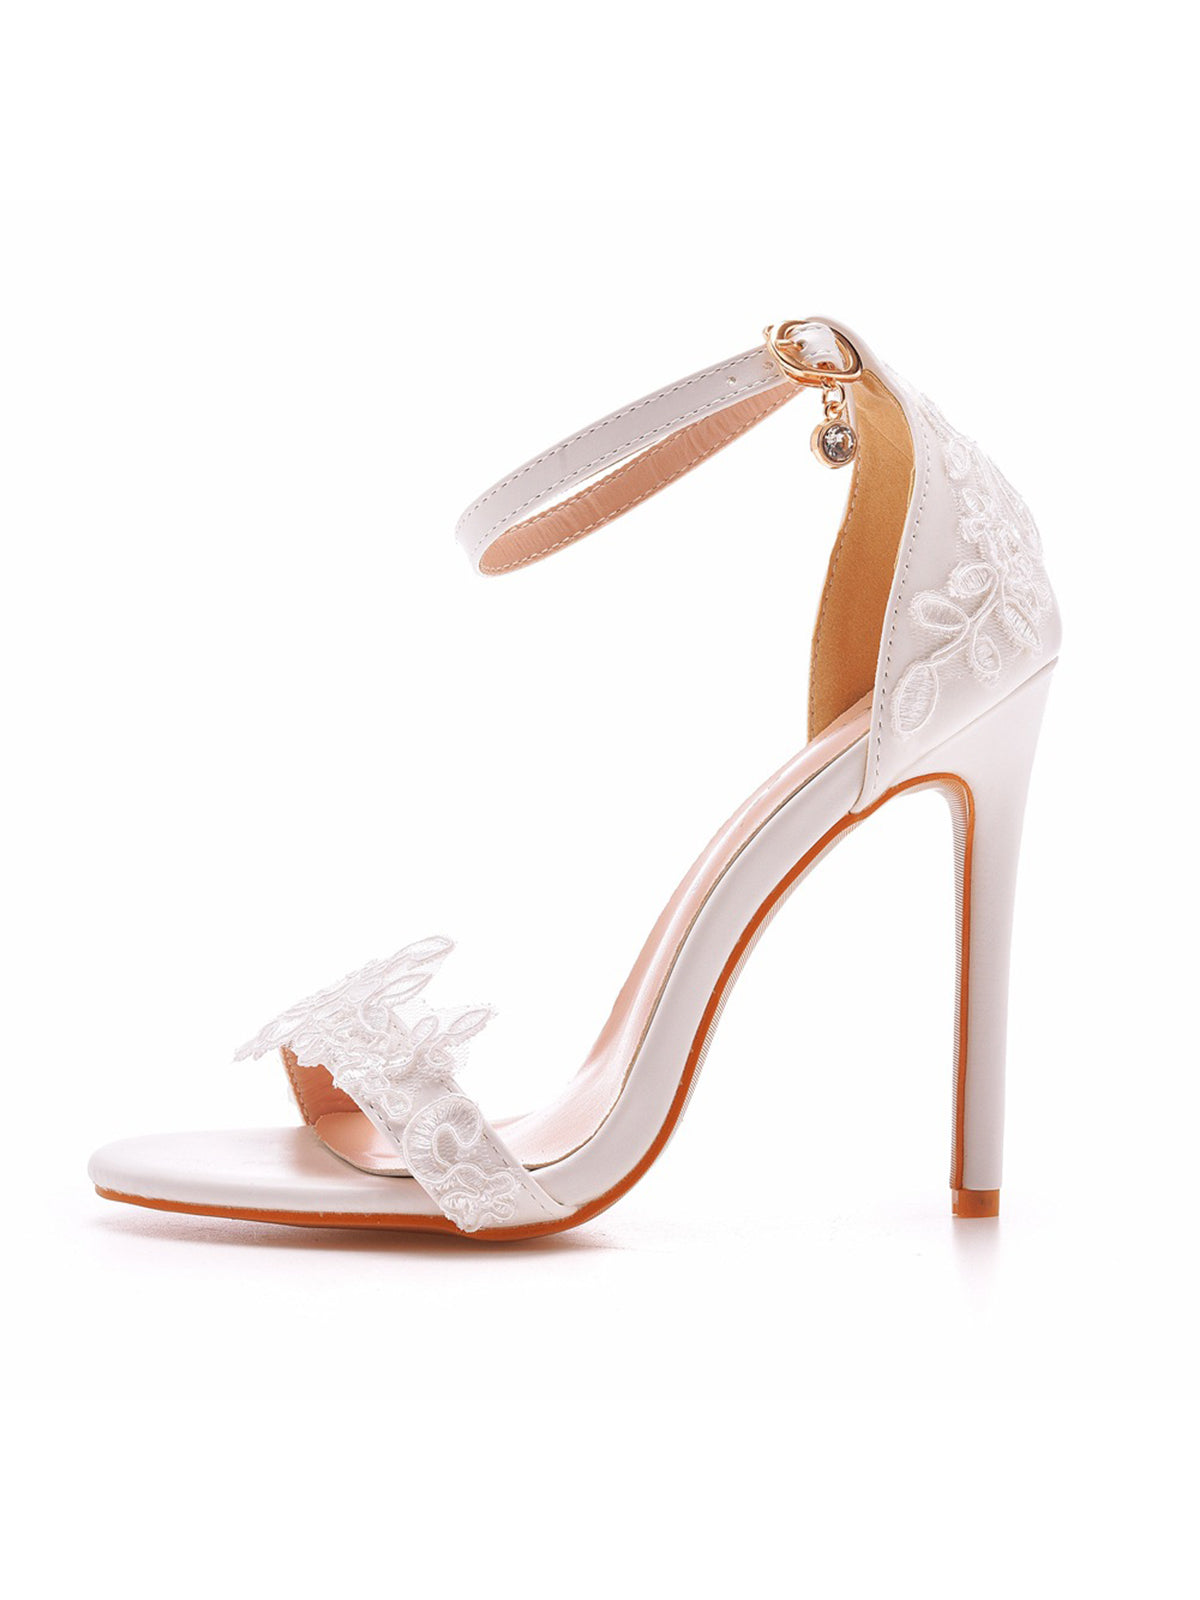 Open Toe lace Ankle Strap Wedding High Heel